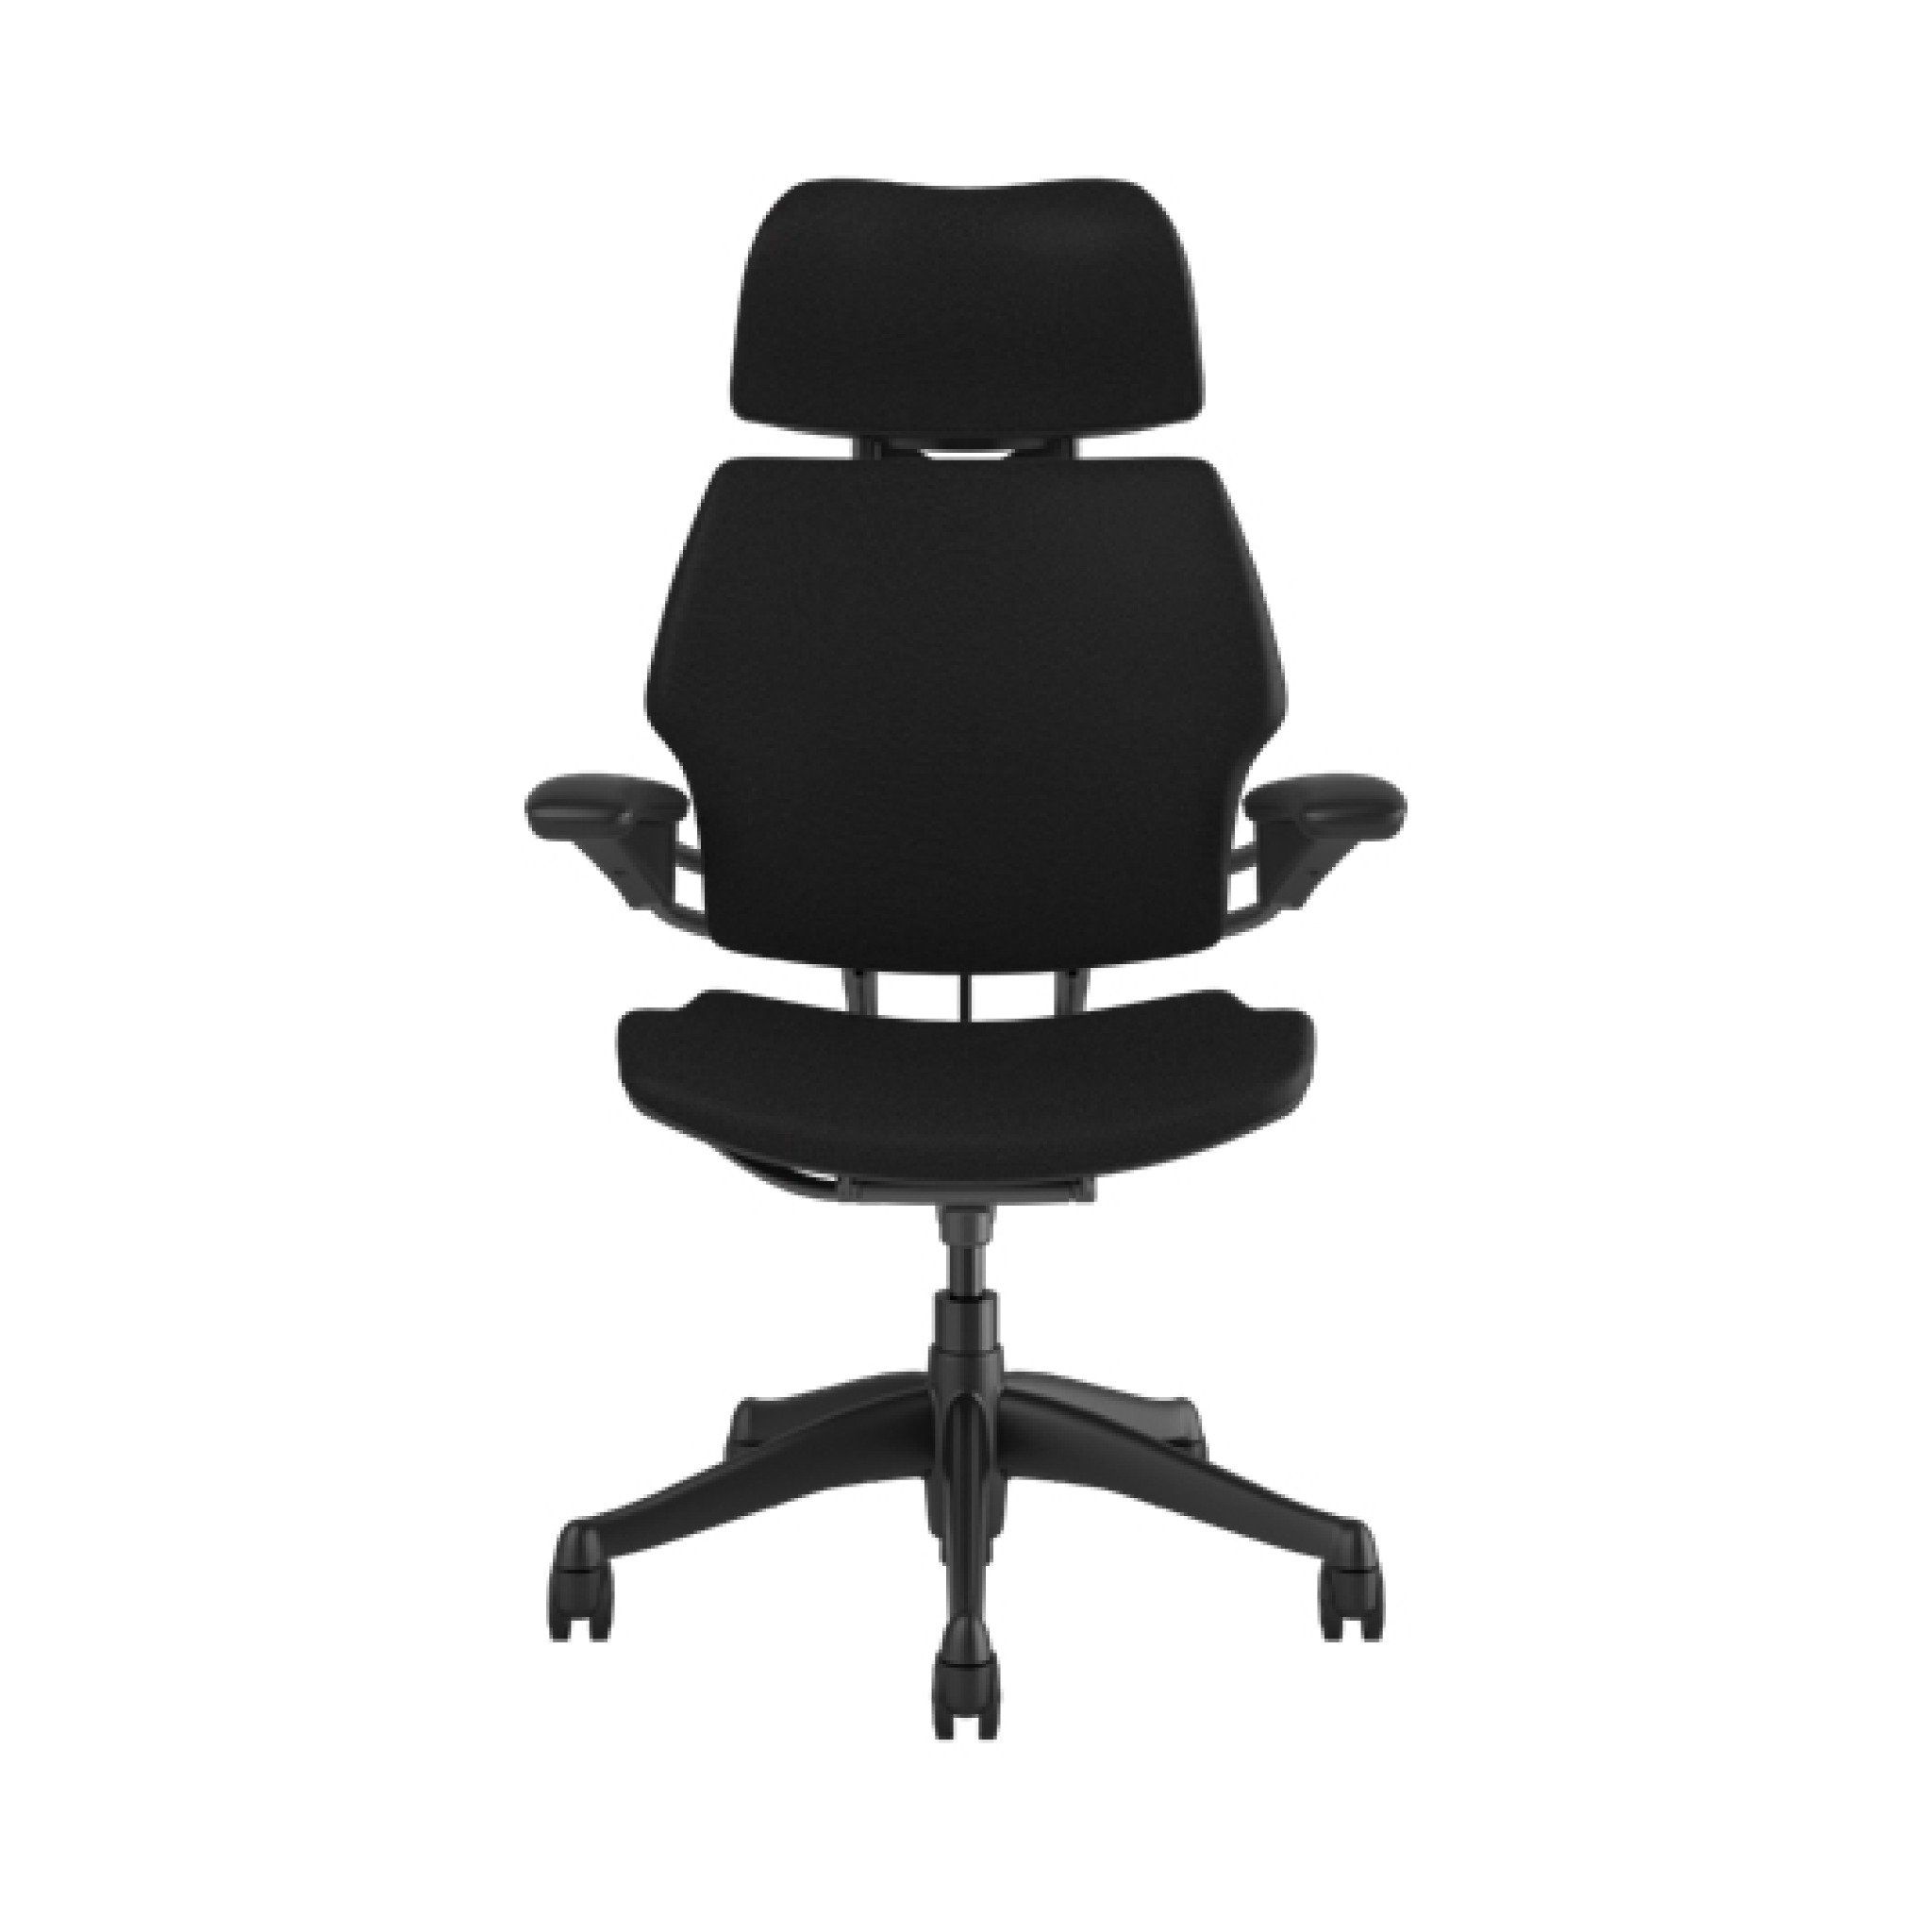  Freedom Chair / Humanscale 